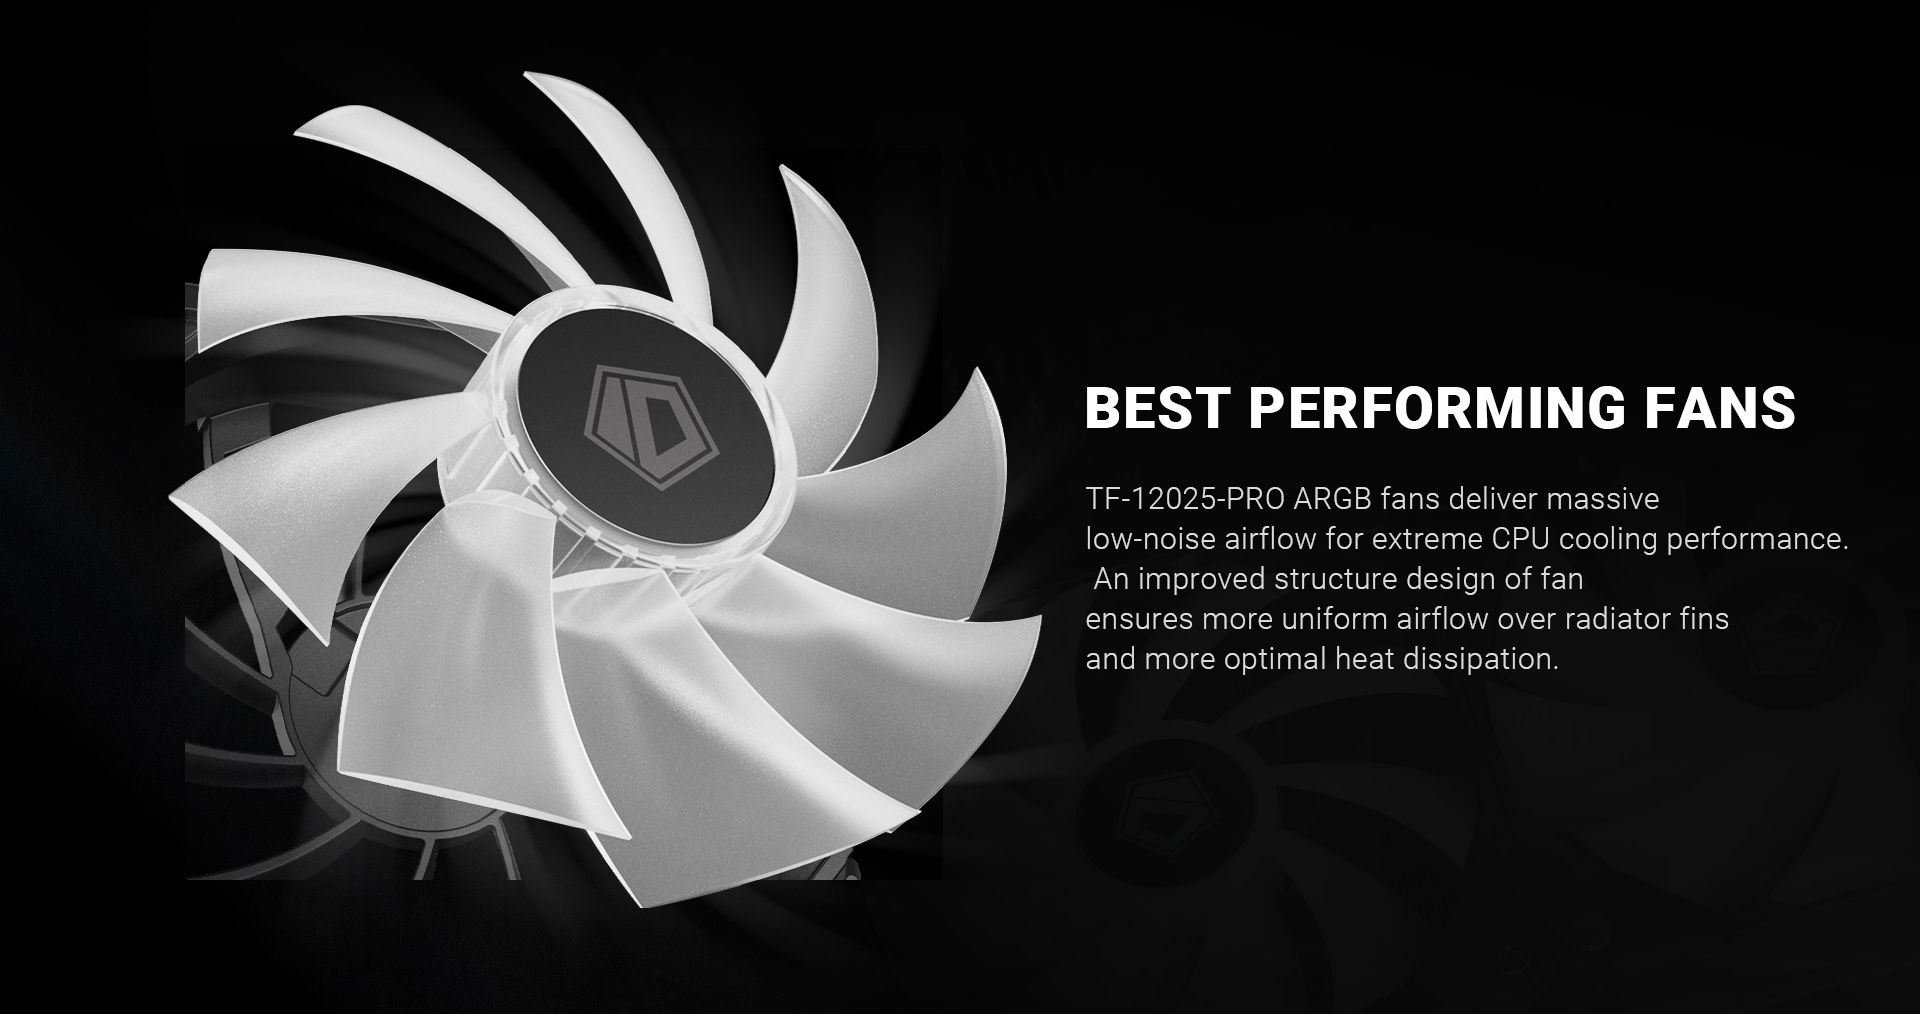 A large marketing image providing additional information about the product ID-COOLING ZoomFlow 360 XT V2 360mm ARGB AIO CPU Liquid Cooler - Black - Additional alt info not provided